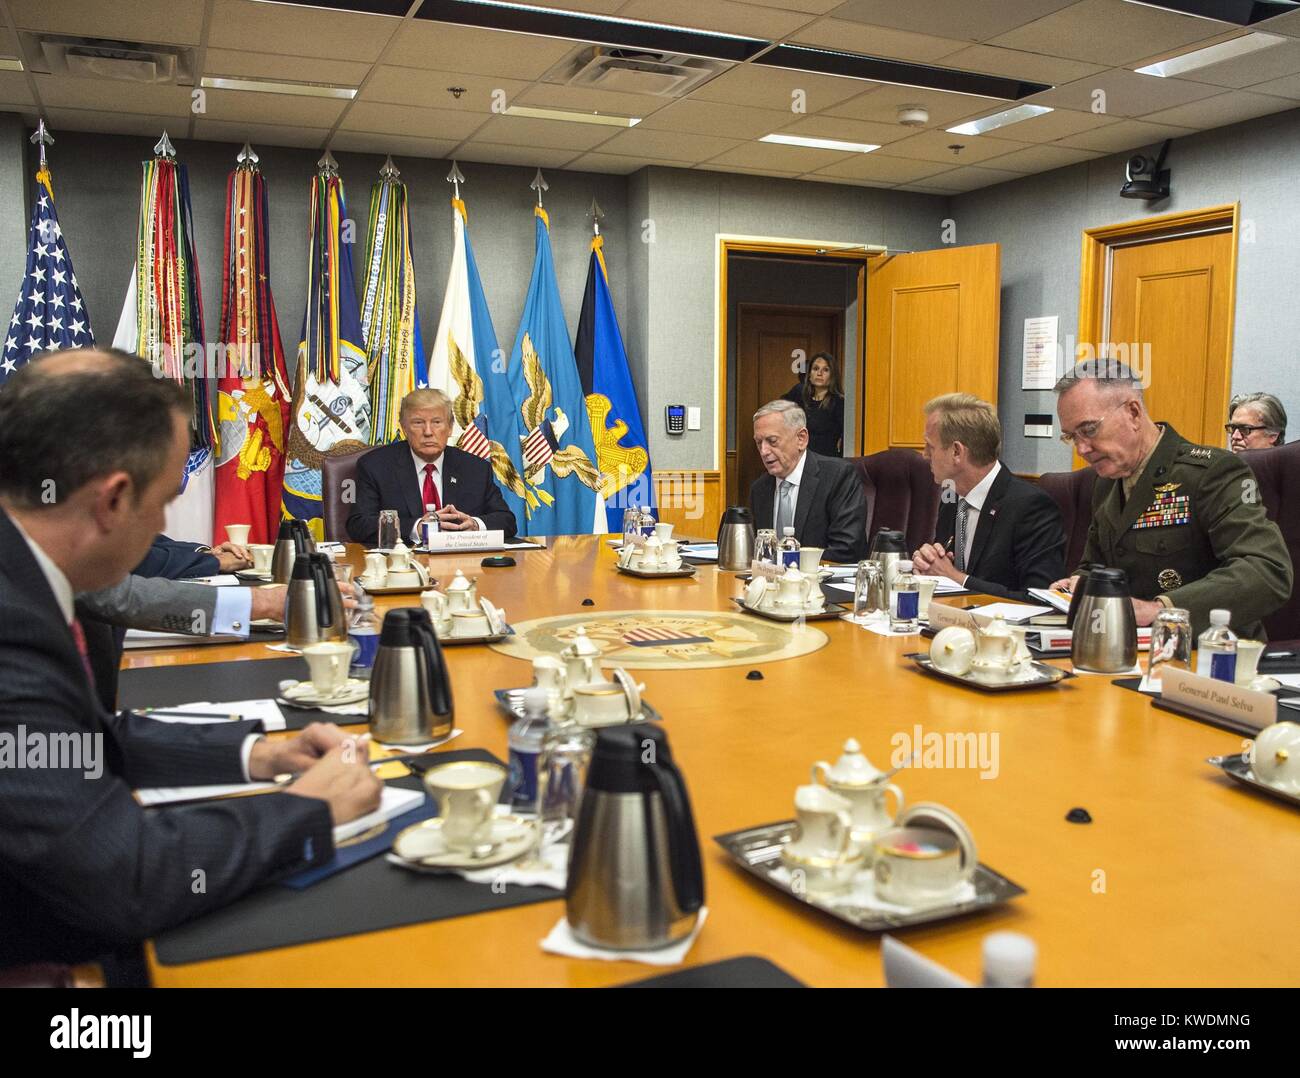 President Donald Trump meets with the National Security Council at the Pentagon, July 20, 2017 (BSLOC 2017 18 166) Stock Photo